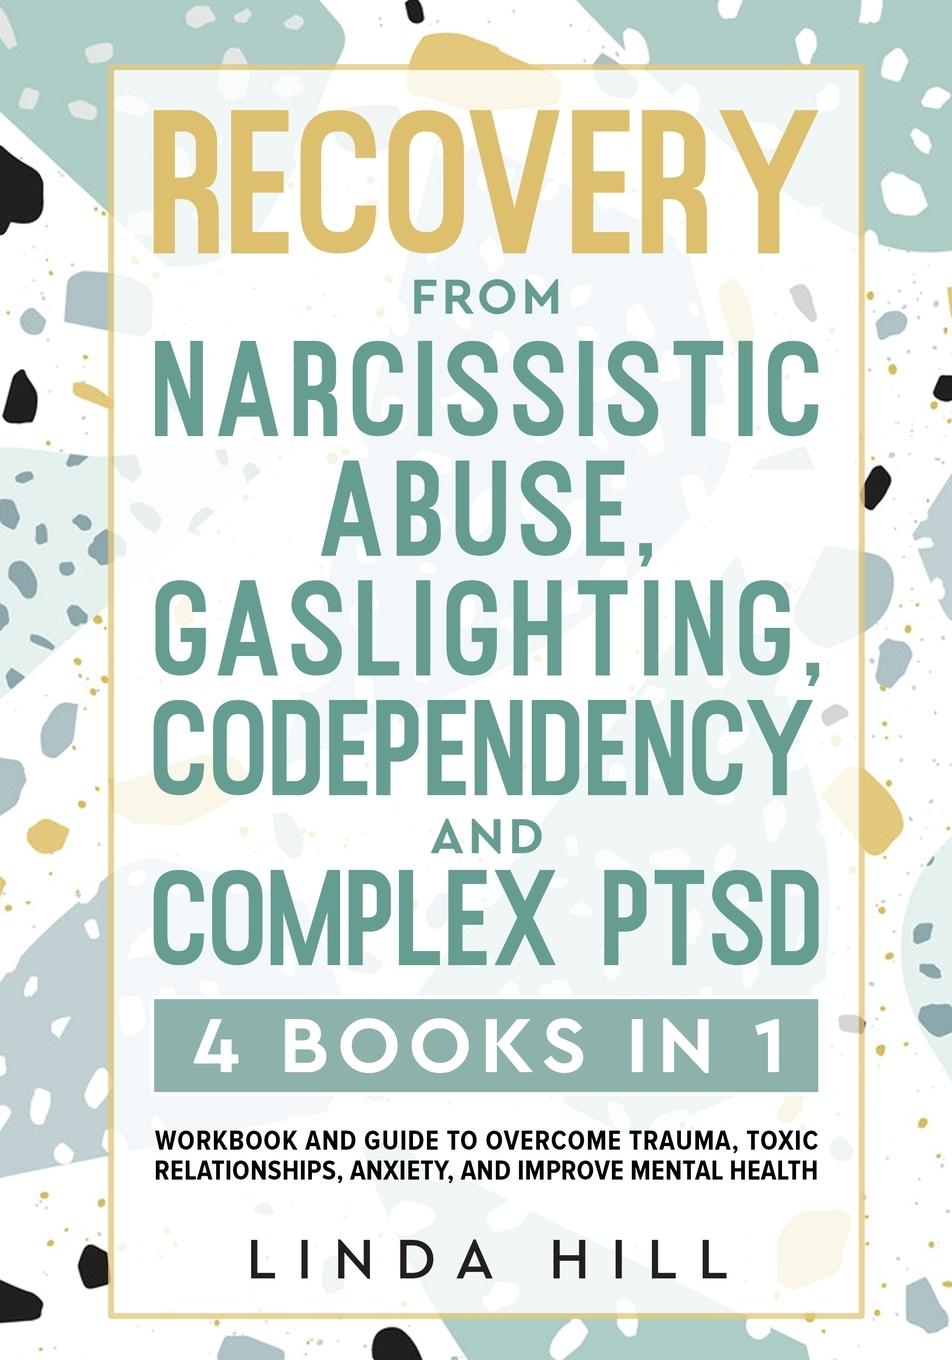 Knjiga Recovery from Narcissistic Abuse, Gaslighting, Codependency and Complex PTSD (4 Books in 1) 